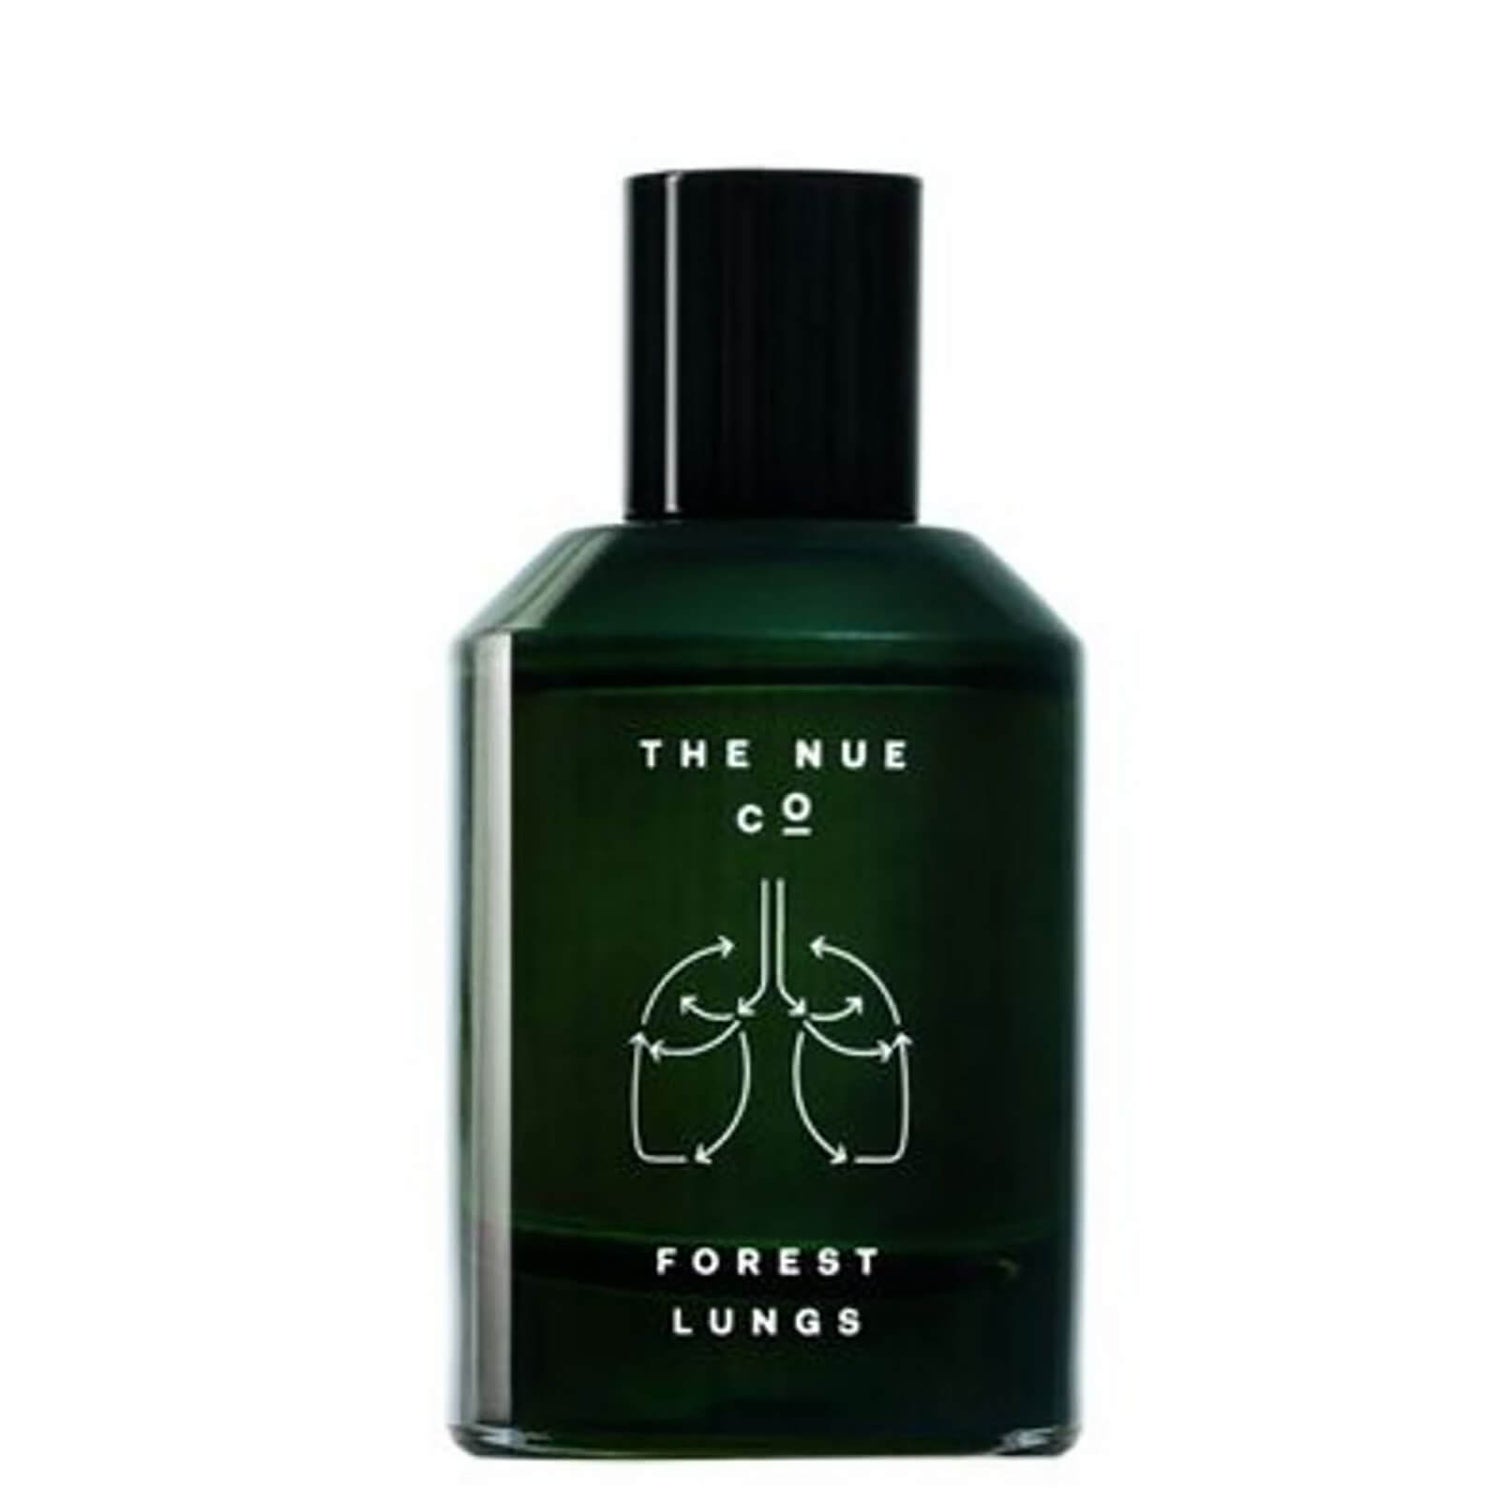 The Nue Co. Forest Lungs (50 ml.)